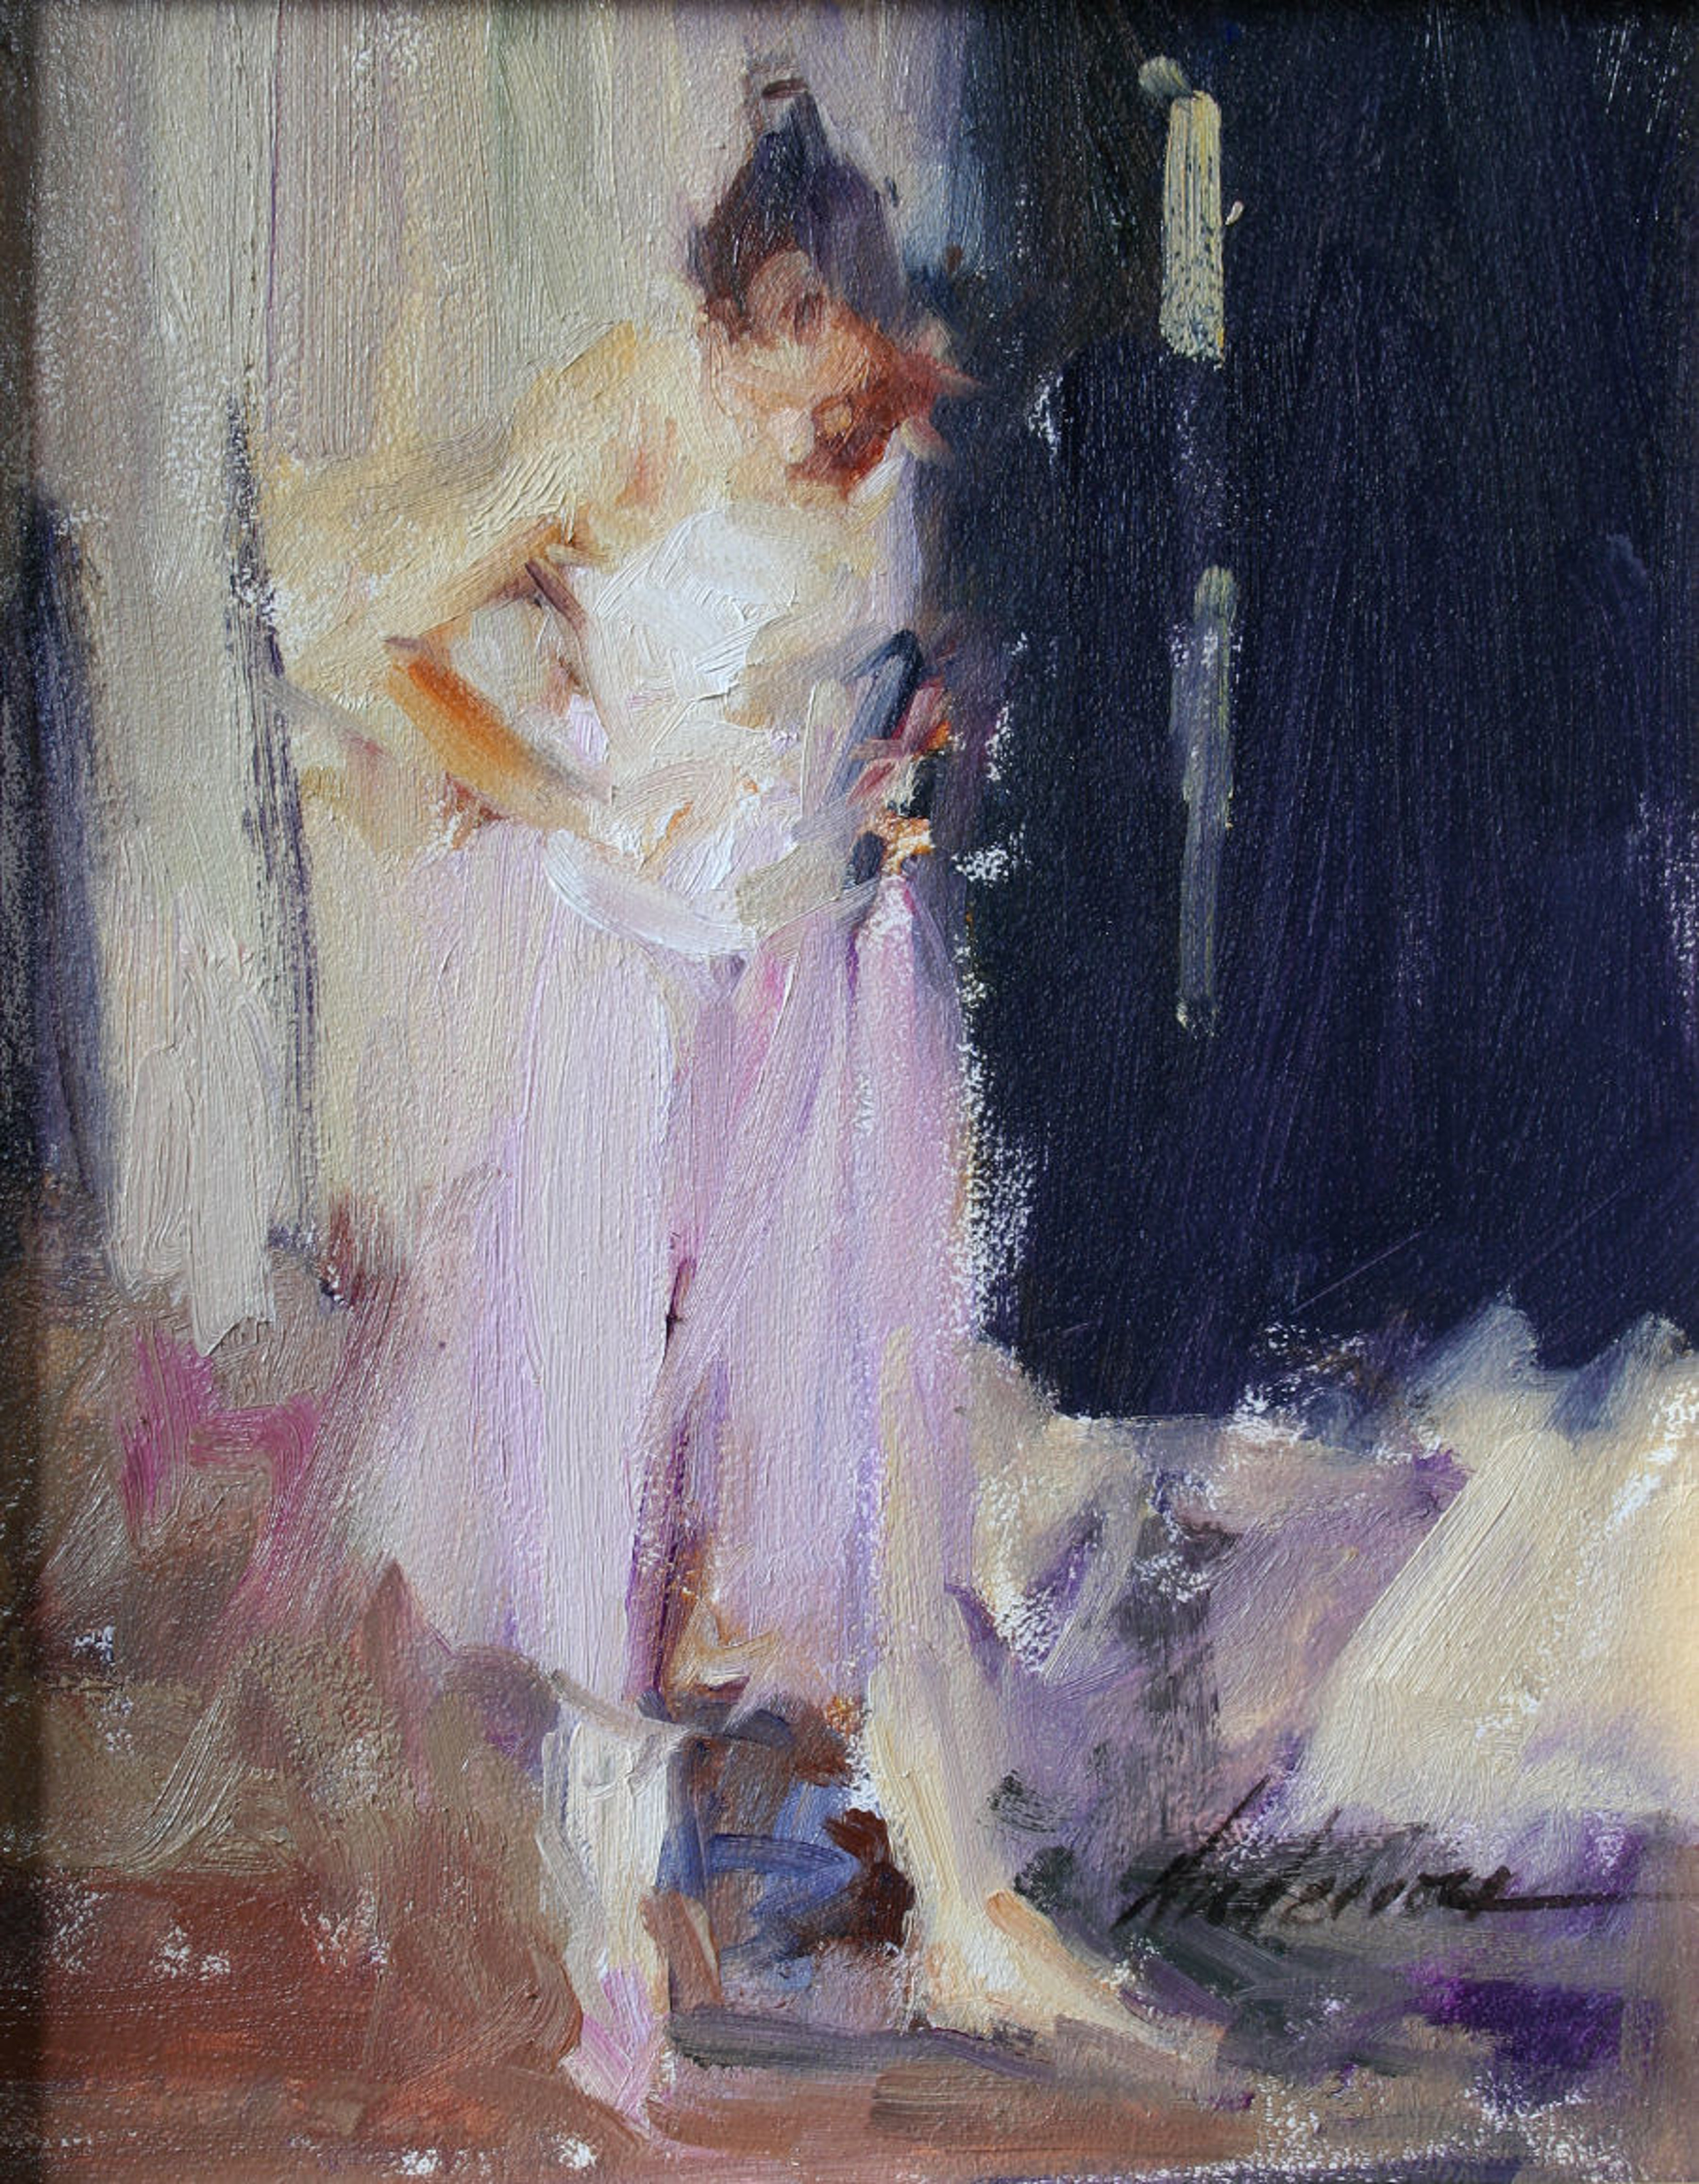 Young Girl in Dance Studio by Carolyn Anderson